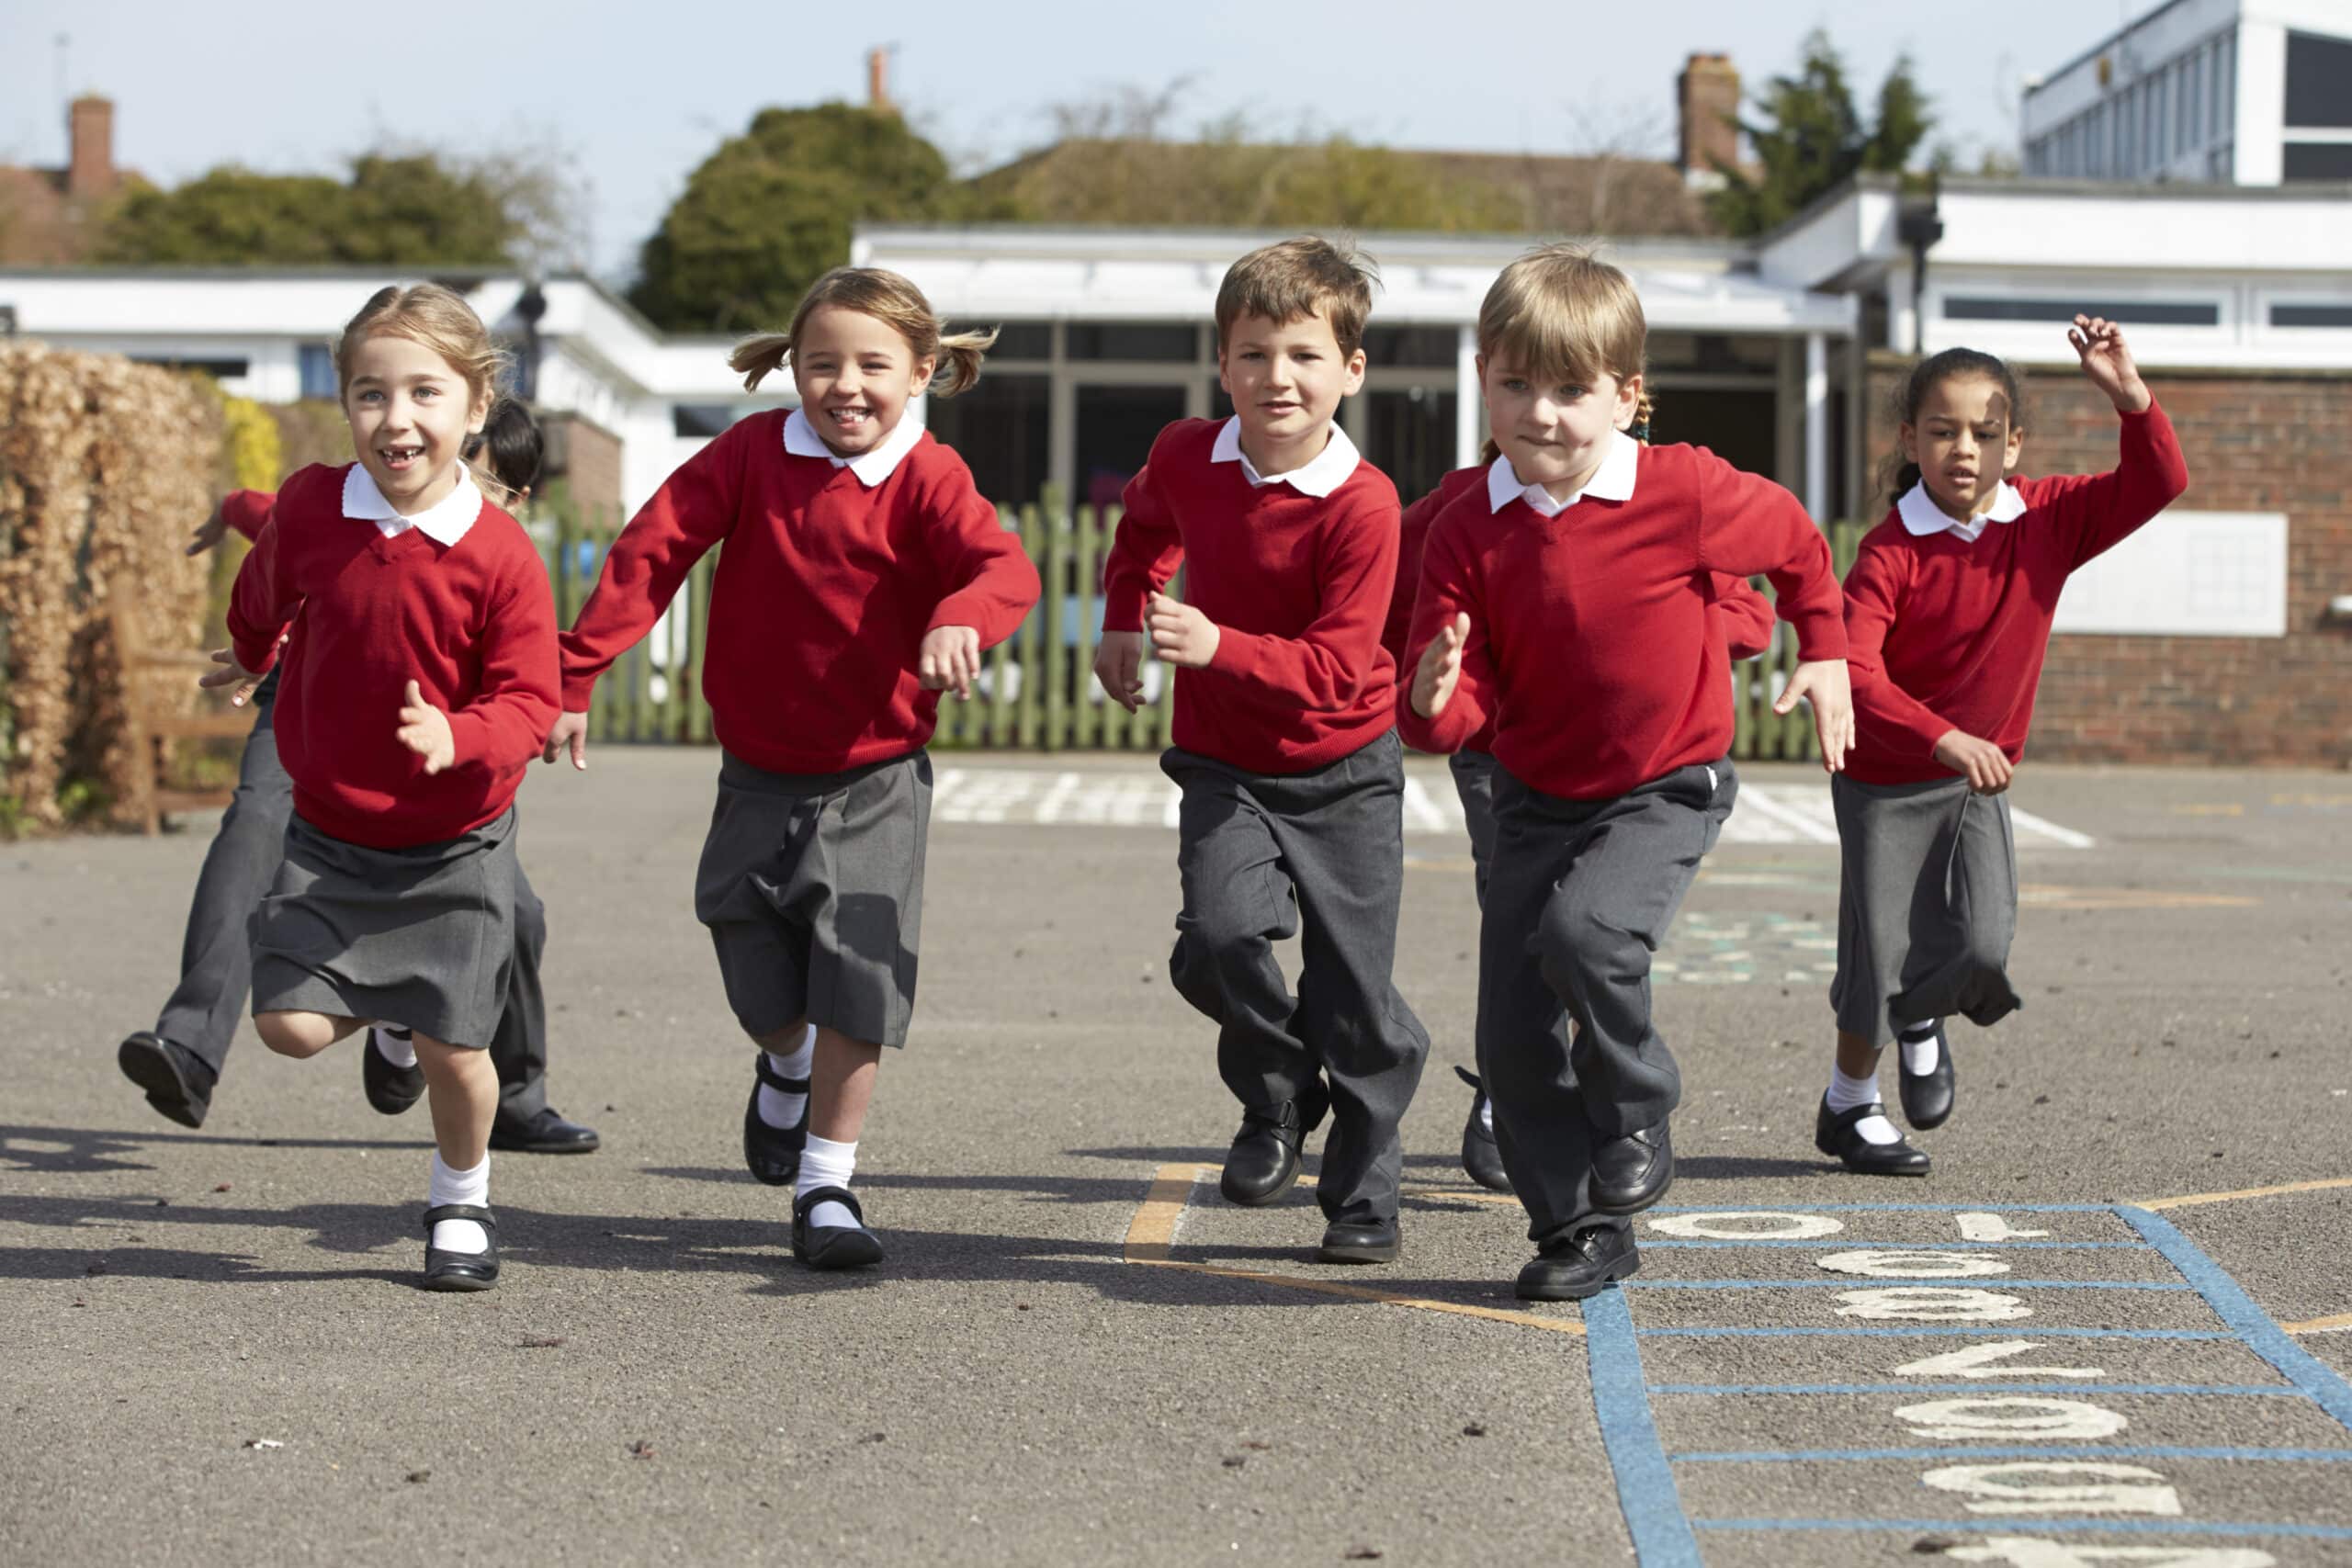 A group of children running in the playground at school